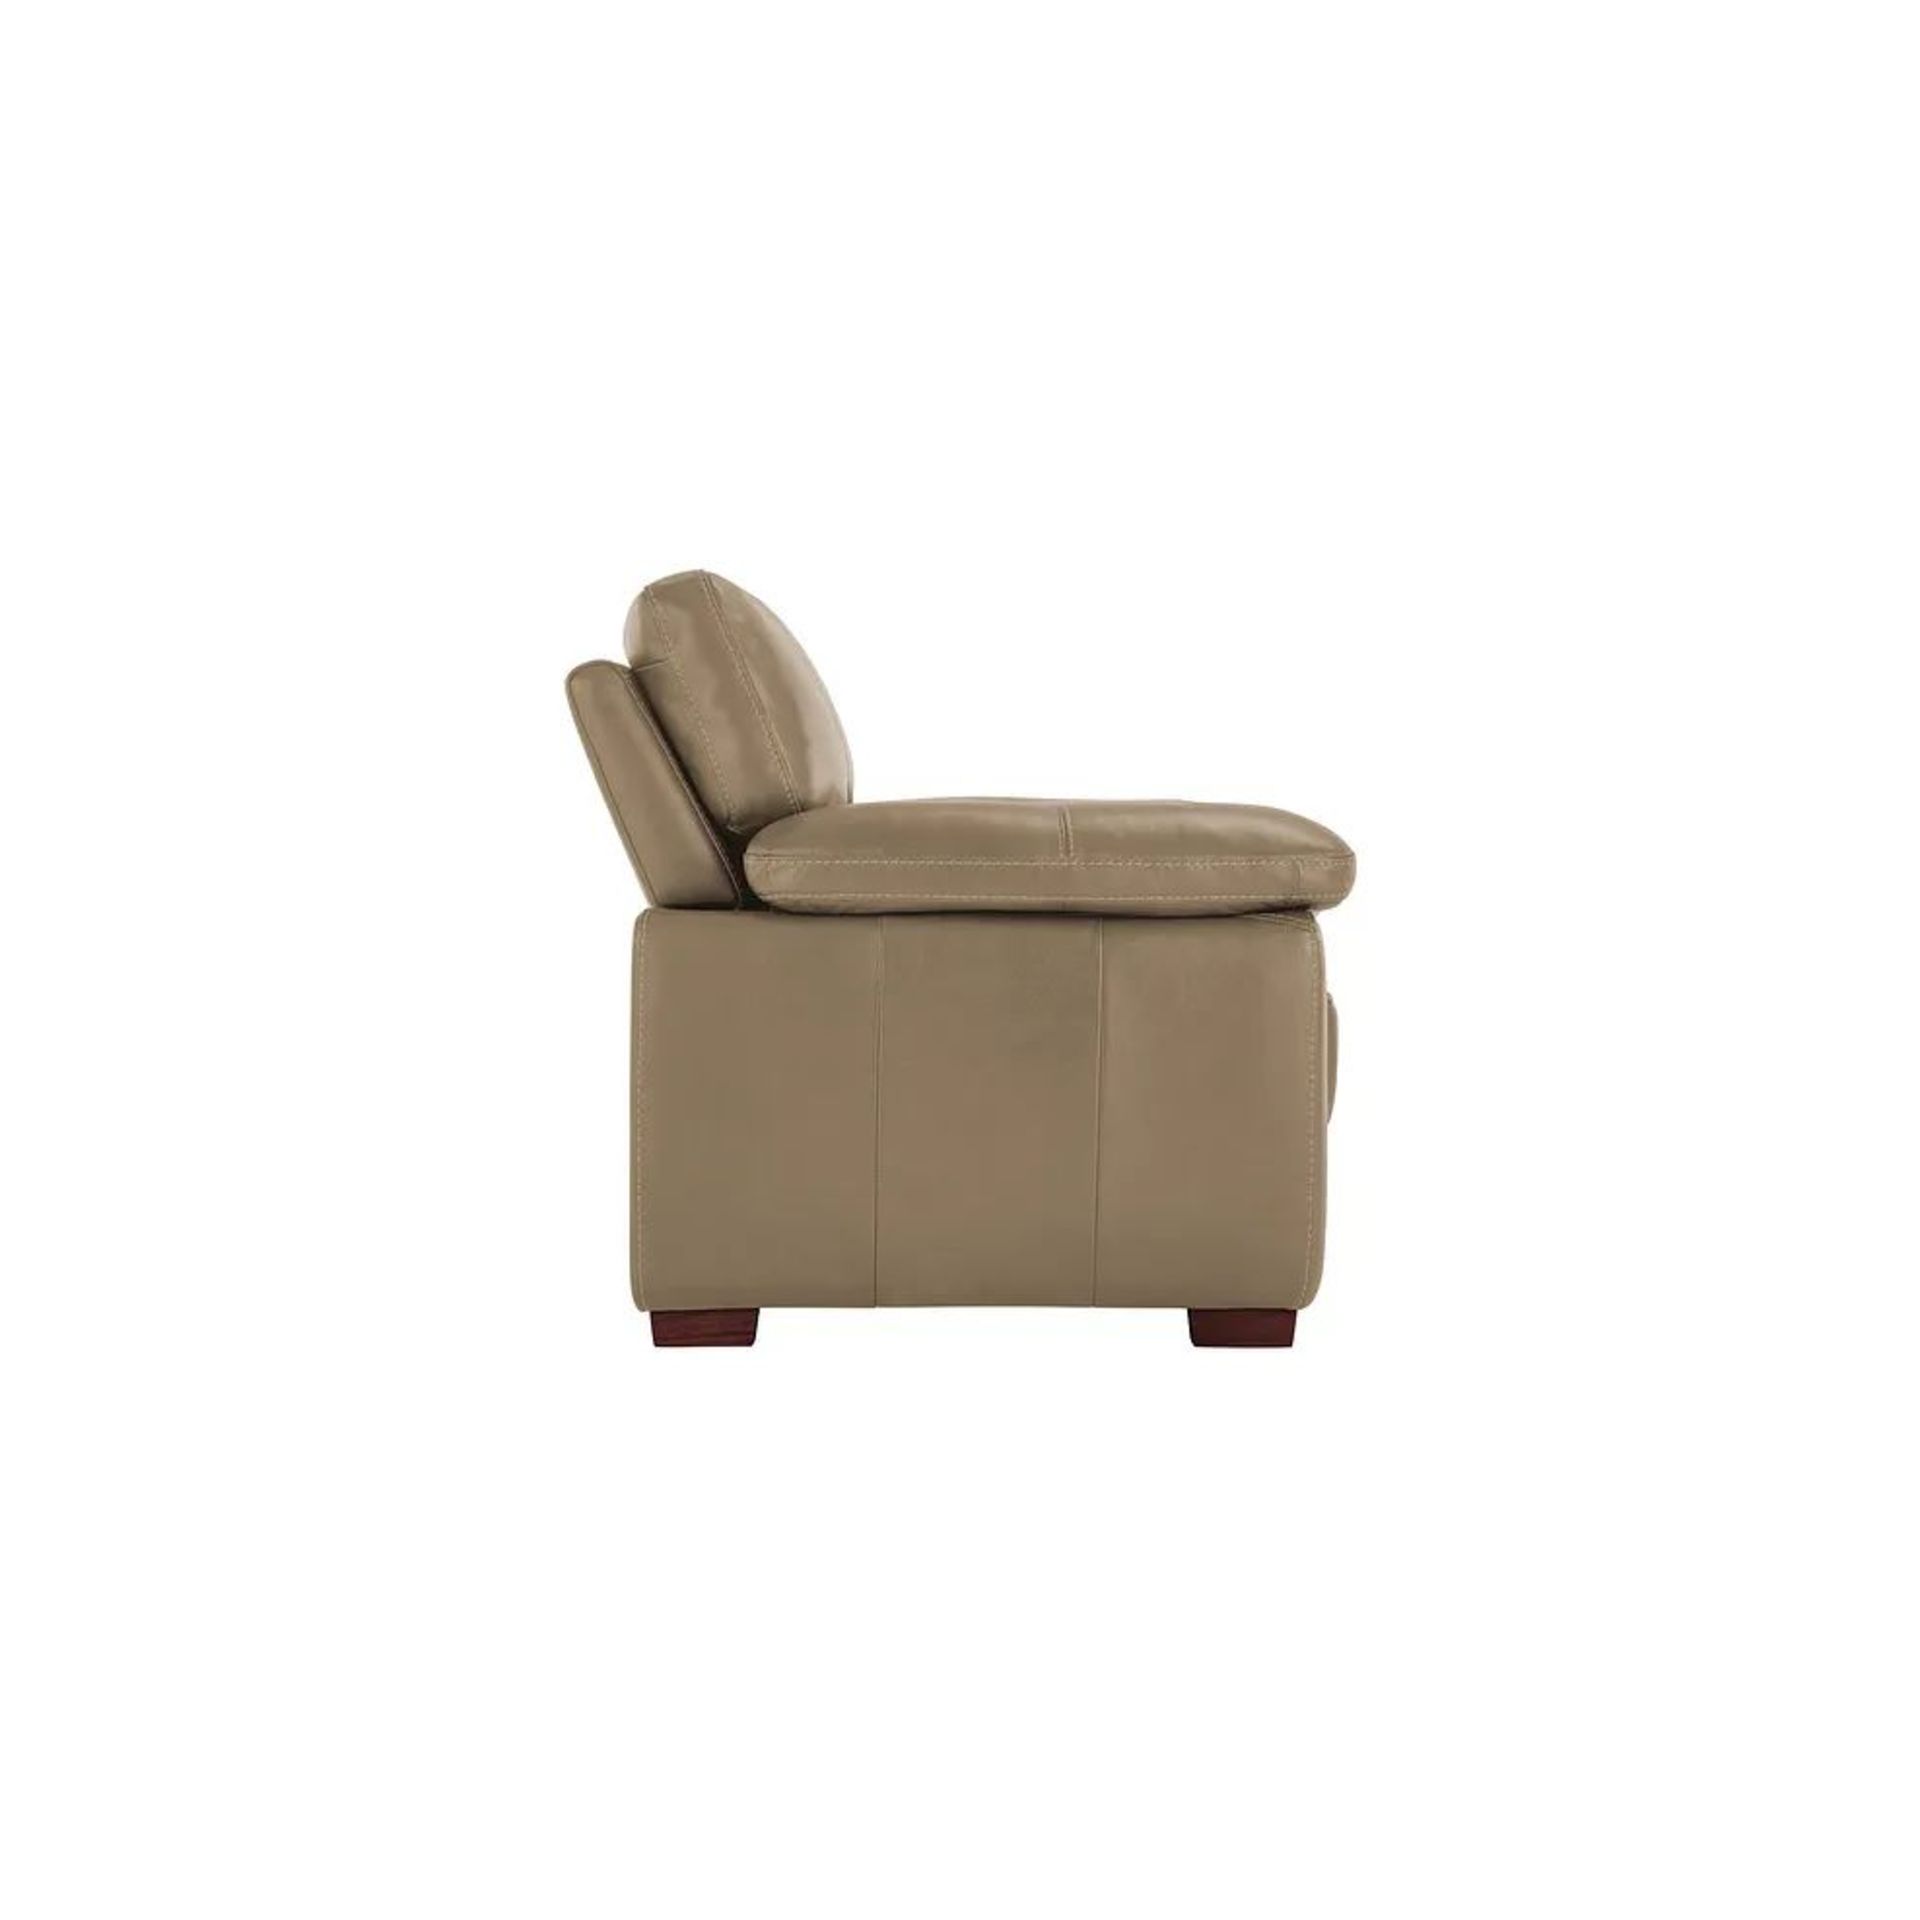 BRAND NEW ARLINGTON Armchair - BEIGE LEATHER. RRP £1099. Create a traditional and homely feel in - Bild 4 aus 9